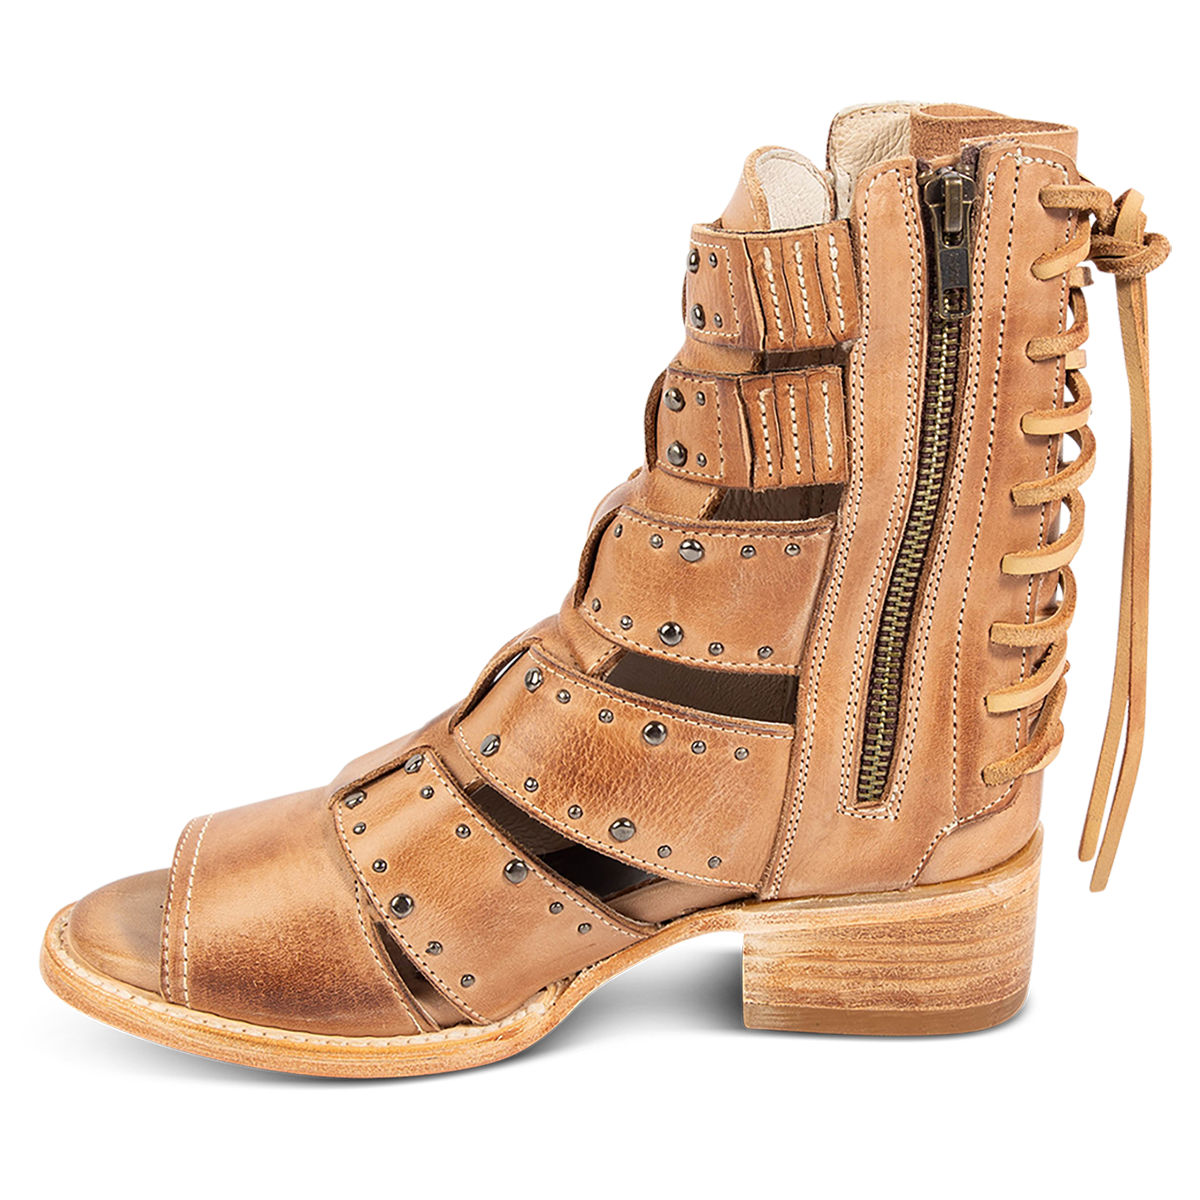 Inside view showing FREEBIRD women's Ghost natural leather sandal with an inside working brass zipper, back panel lacing and an exposed exterior